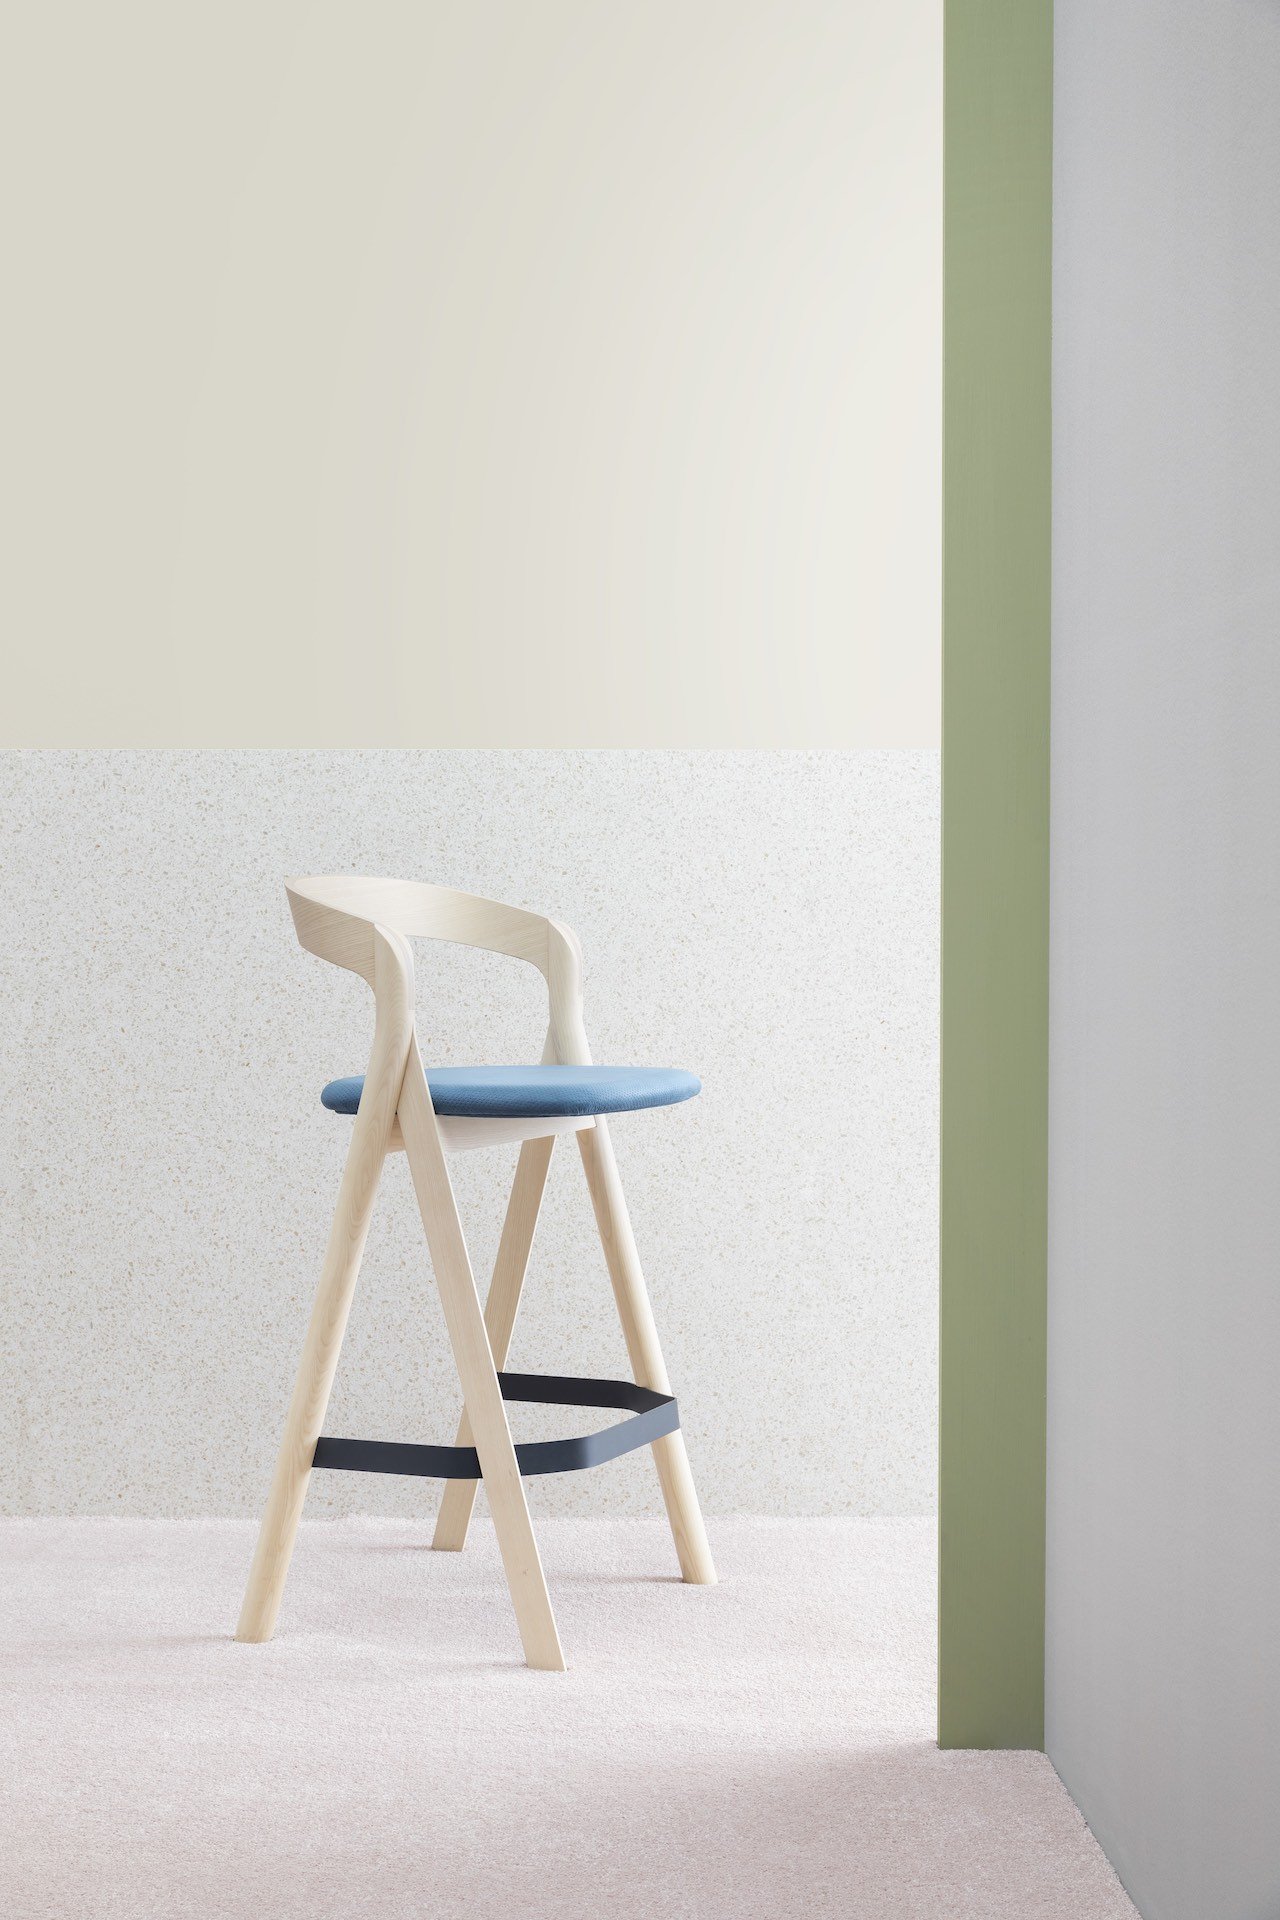 Diverge Stool from Miniforms, designed by Skrivo